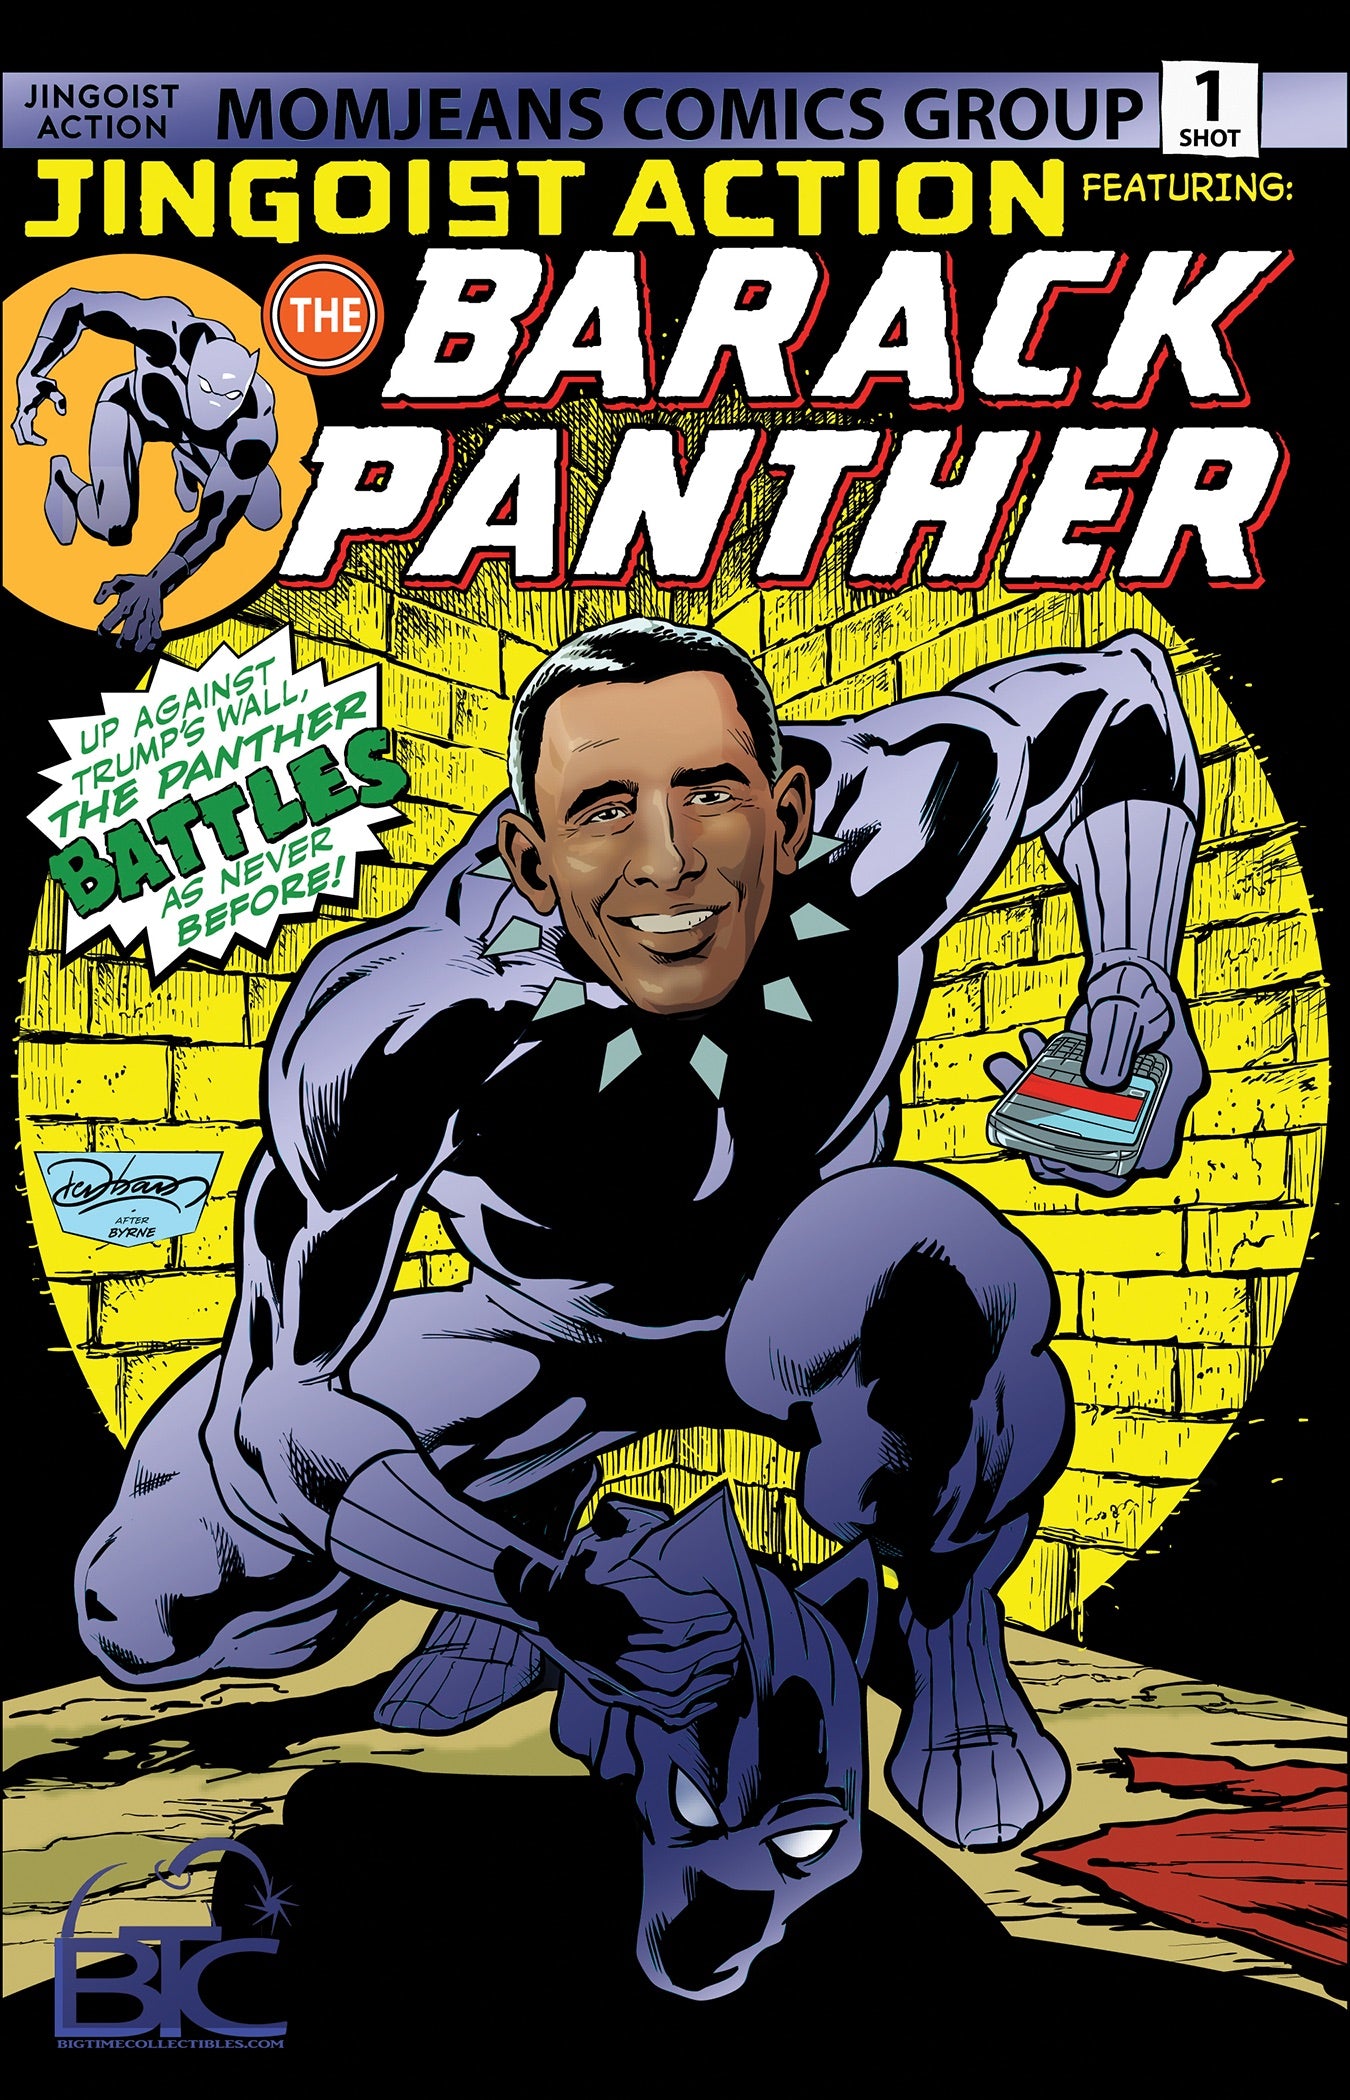 BARACK PANTHER #1 BTC FOIL EXCLUSIVE LIMITED TO ONLY 300 COPIES